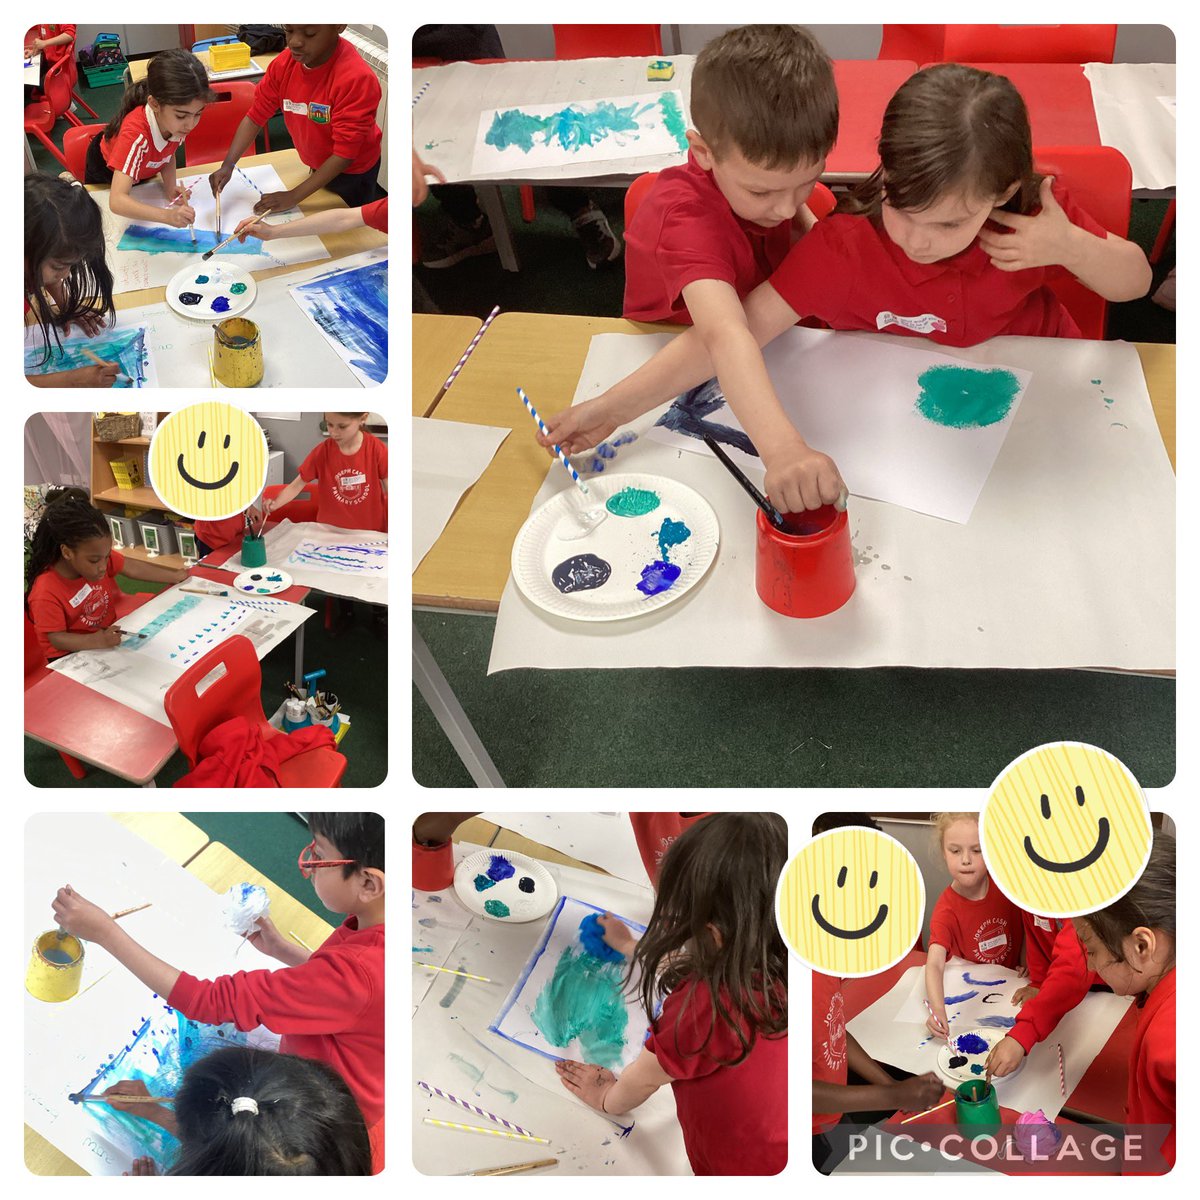 Year 2 has been creating seascapes for our new topic to infinity and beyond!